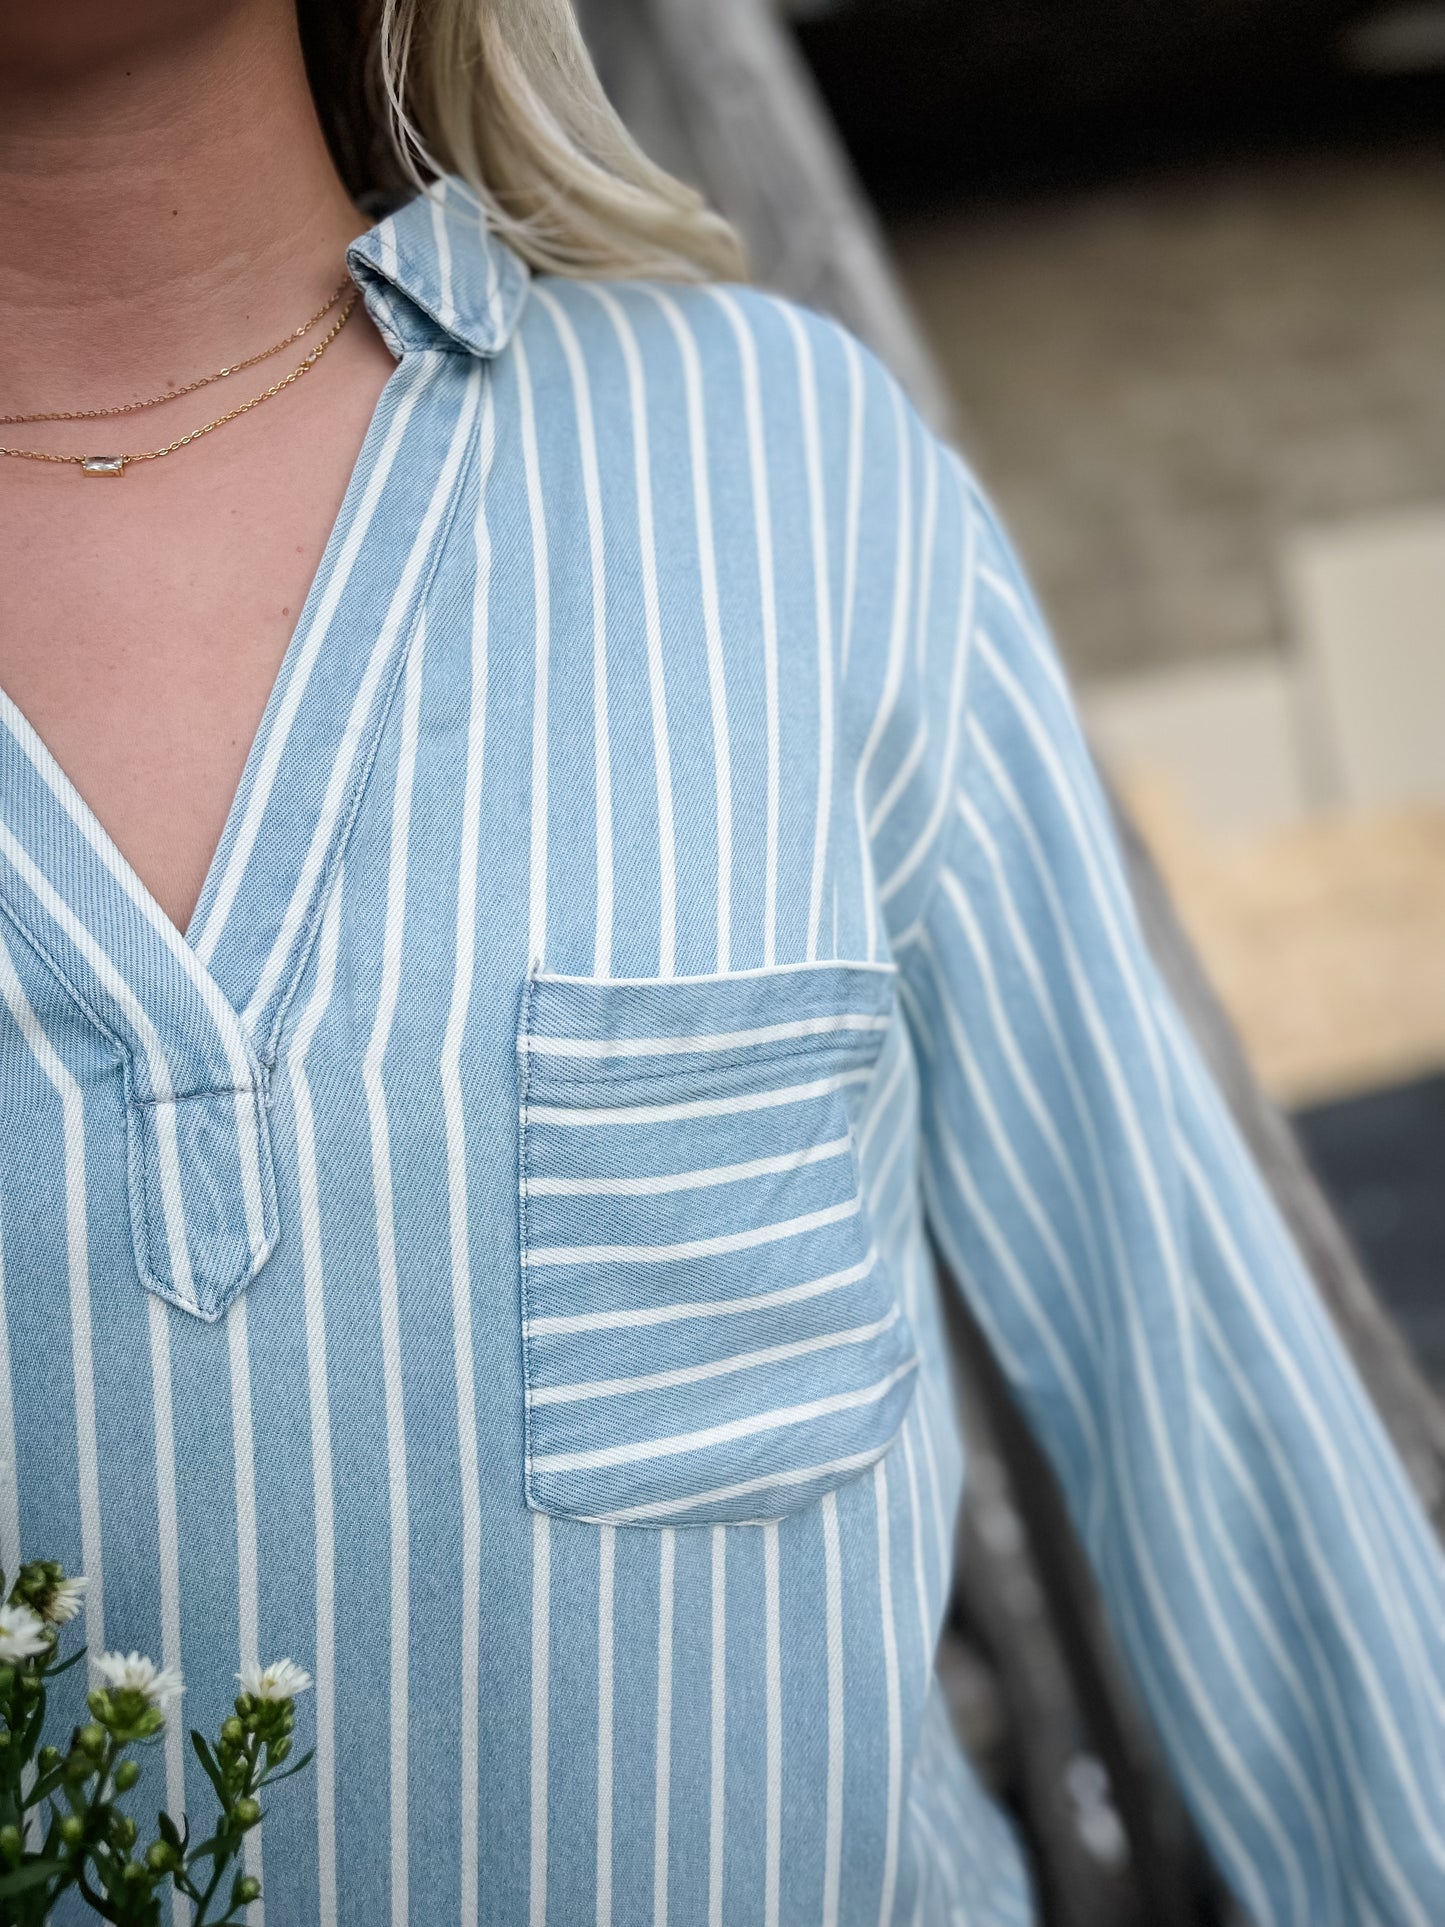 Back to Business Chambray Striped Dress